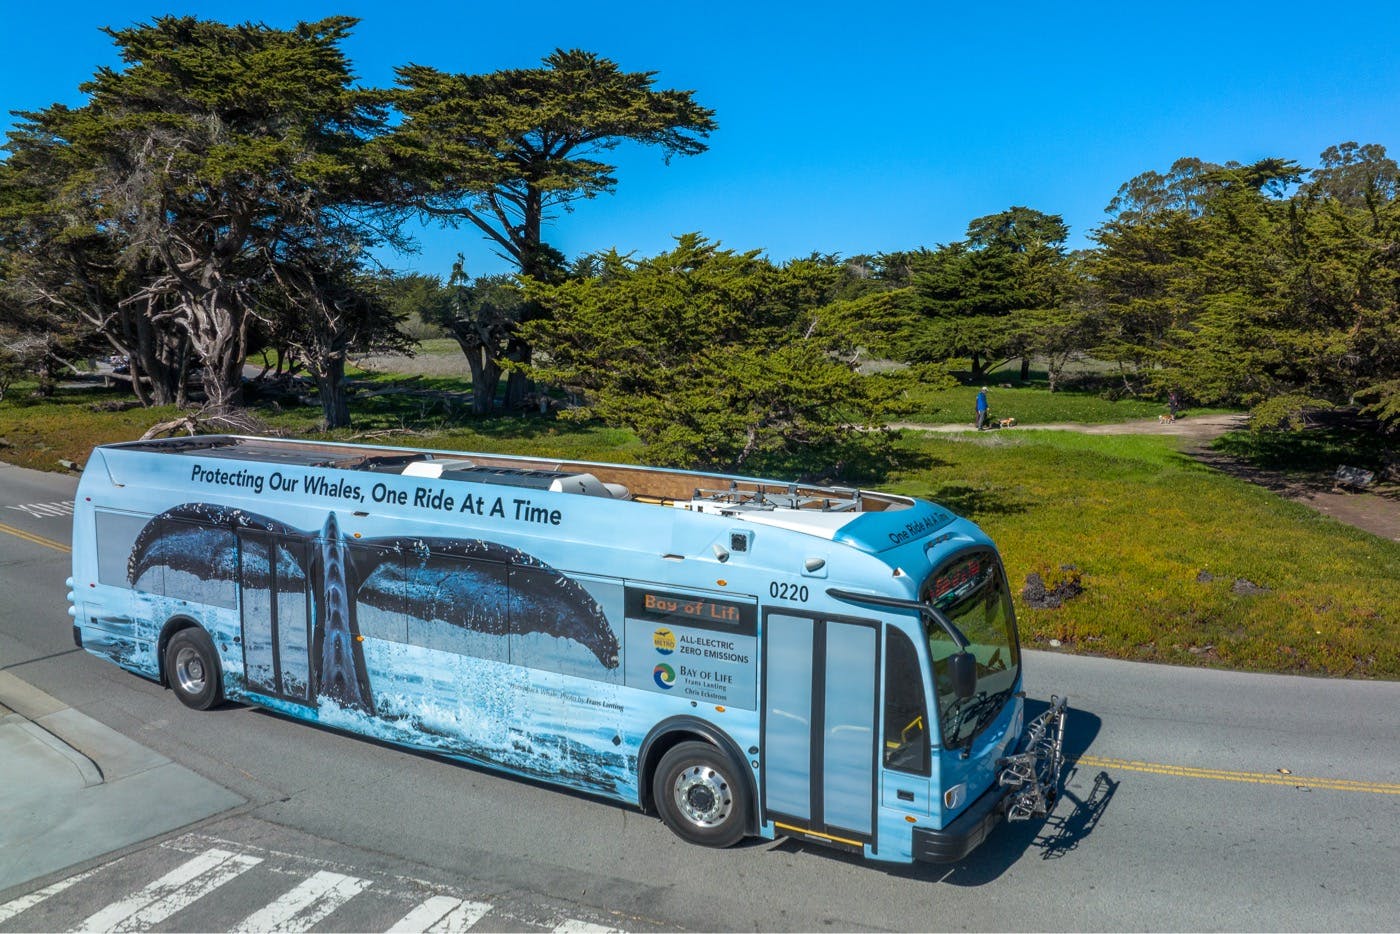 A Santa Cruz Metro bus with a whale's tail wallpaper drives on West Cliff